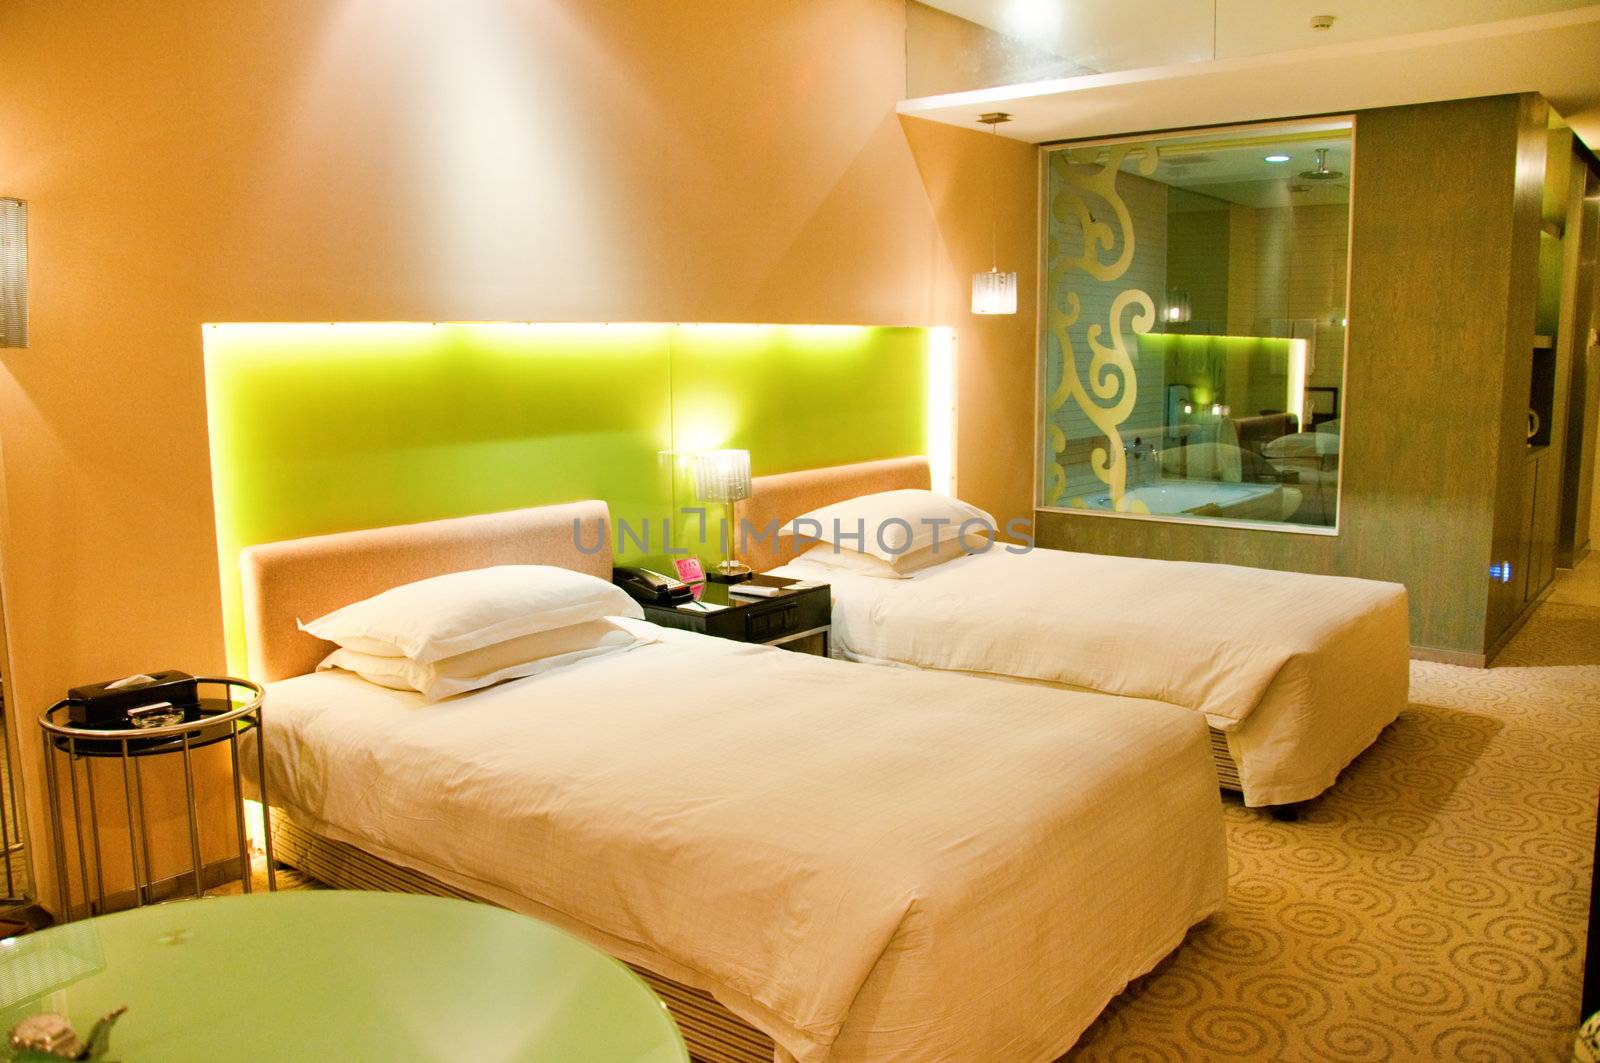 The view of luxury bed room (interior of house)